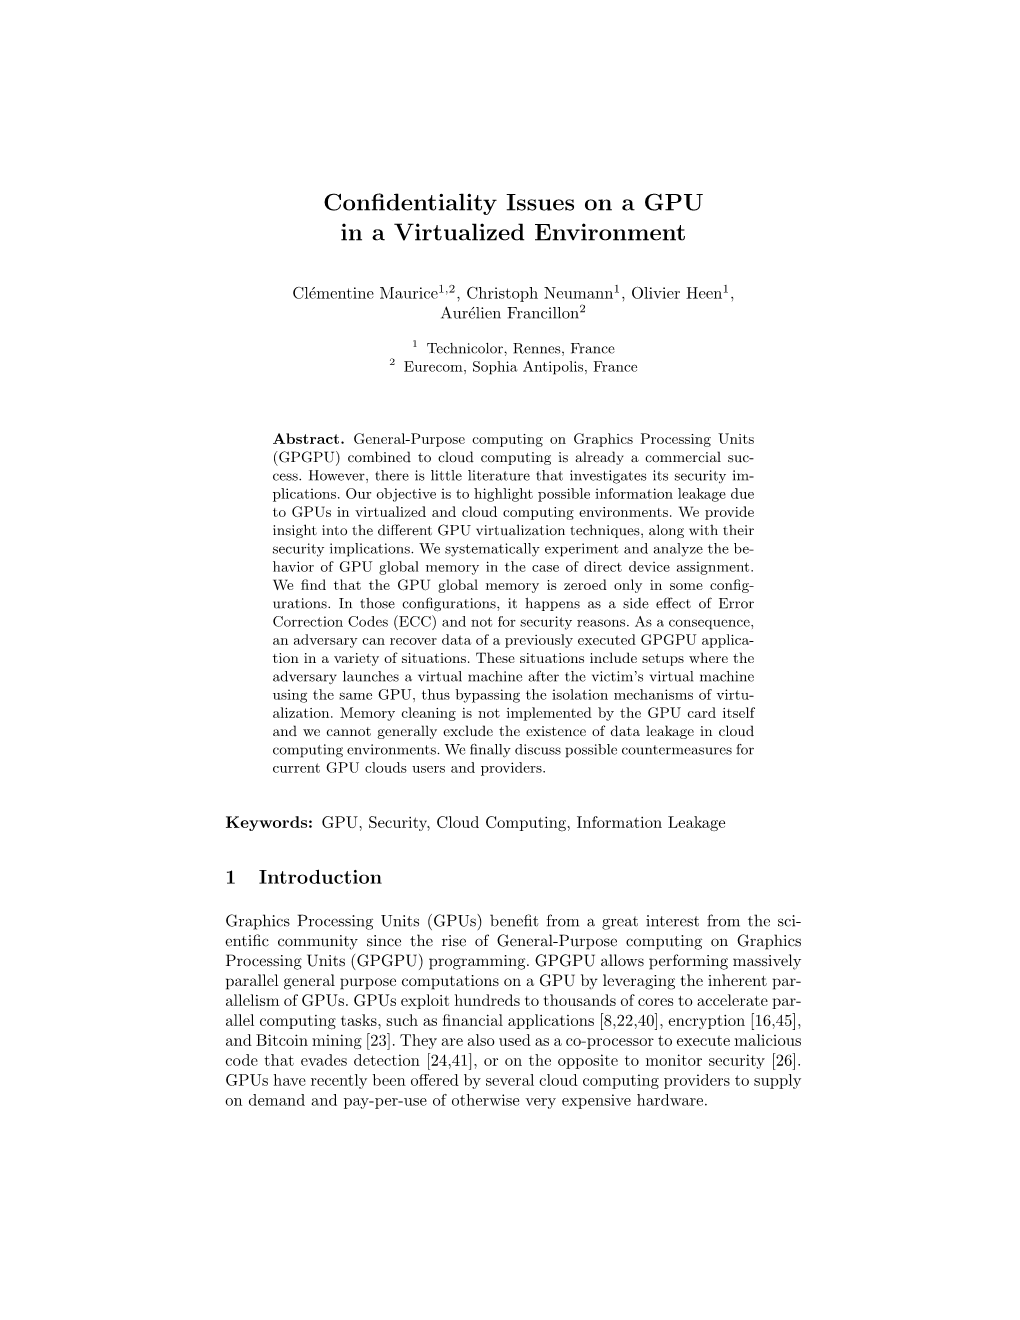 Confidentiality Issues on a GPU in a Virtualized Environment